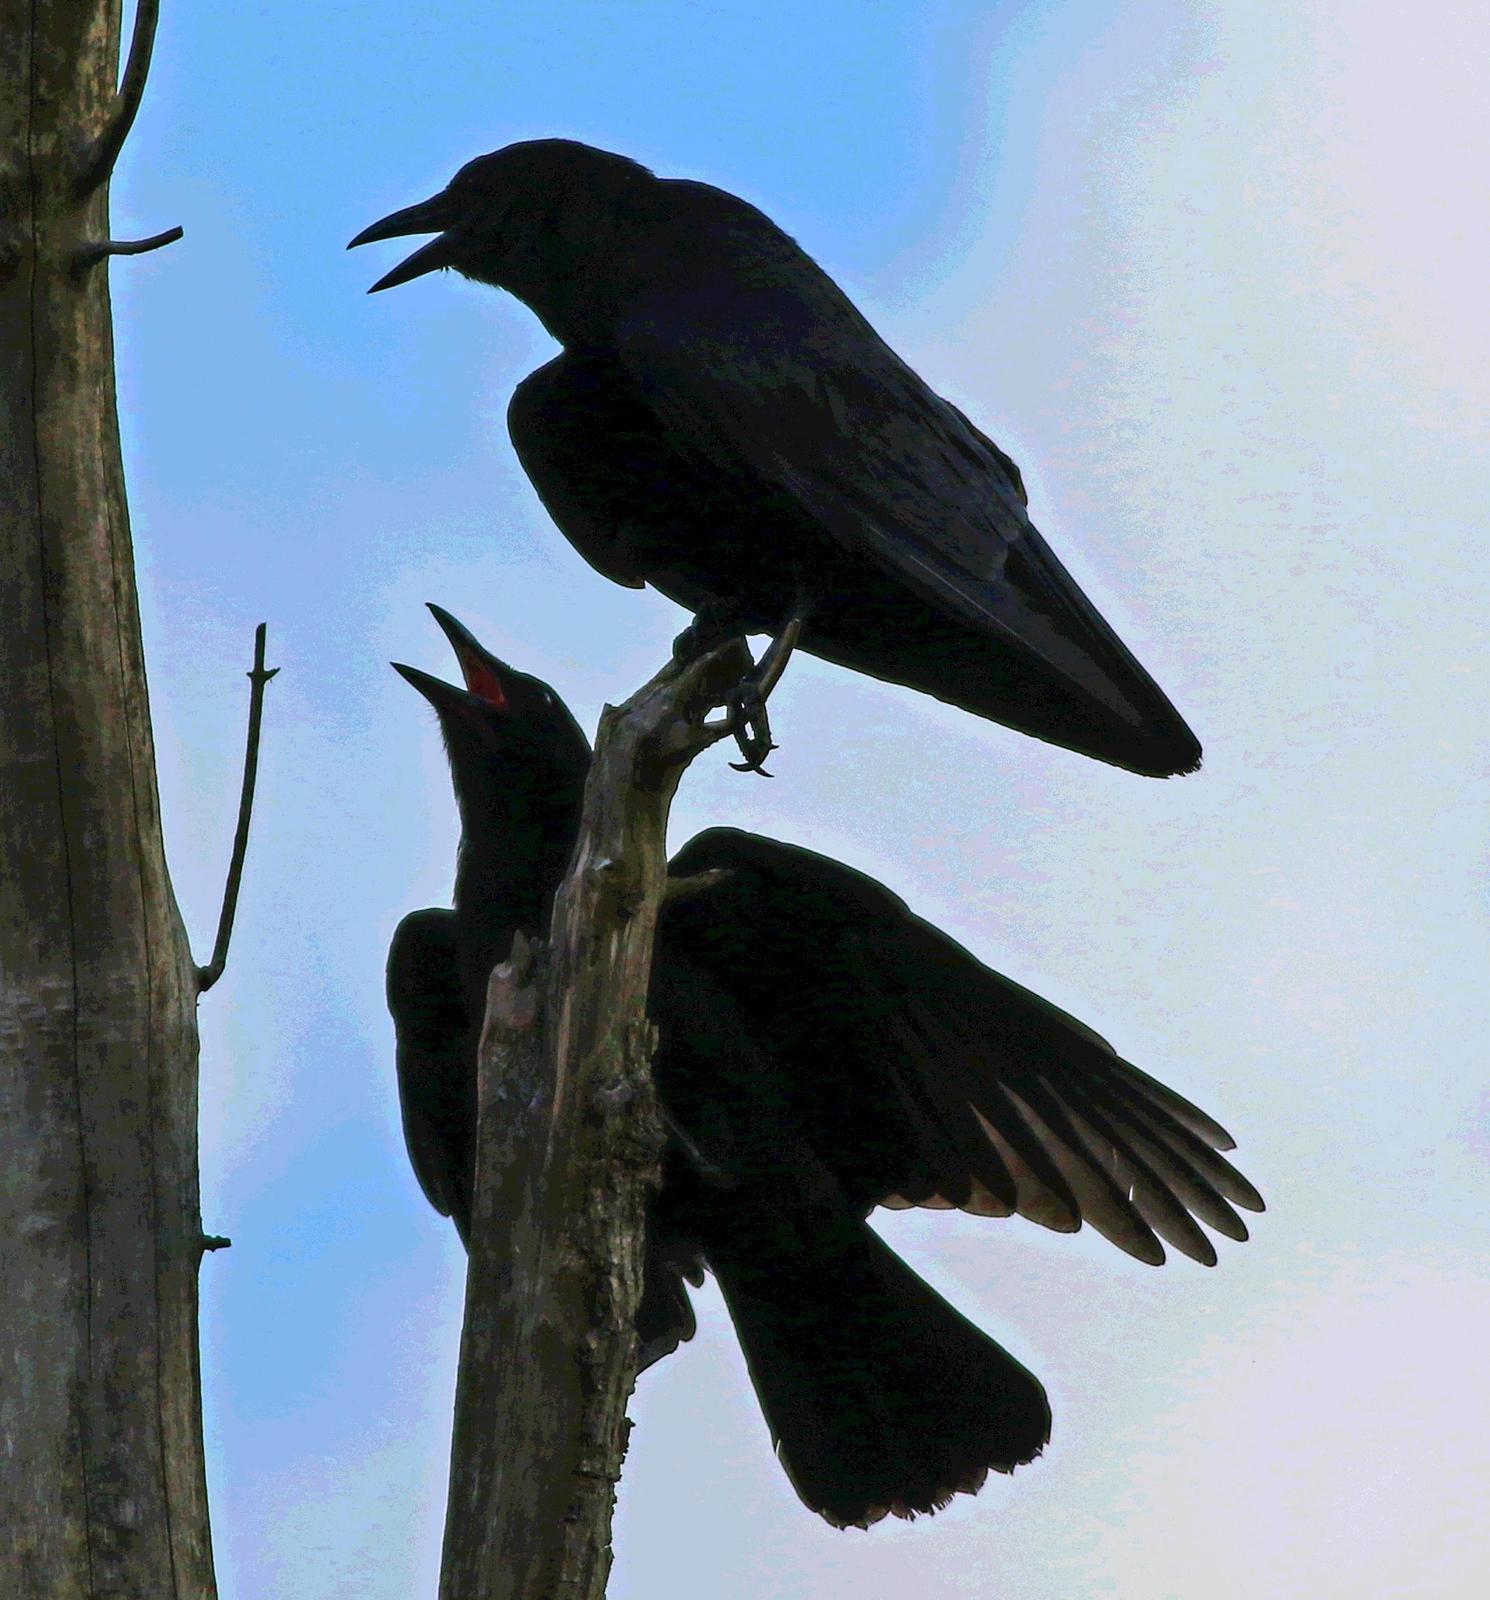 Fish Crow Photo by Tom Gannon